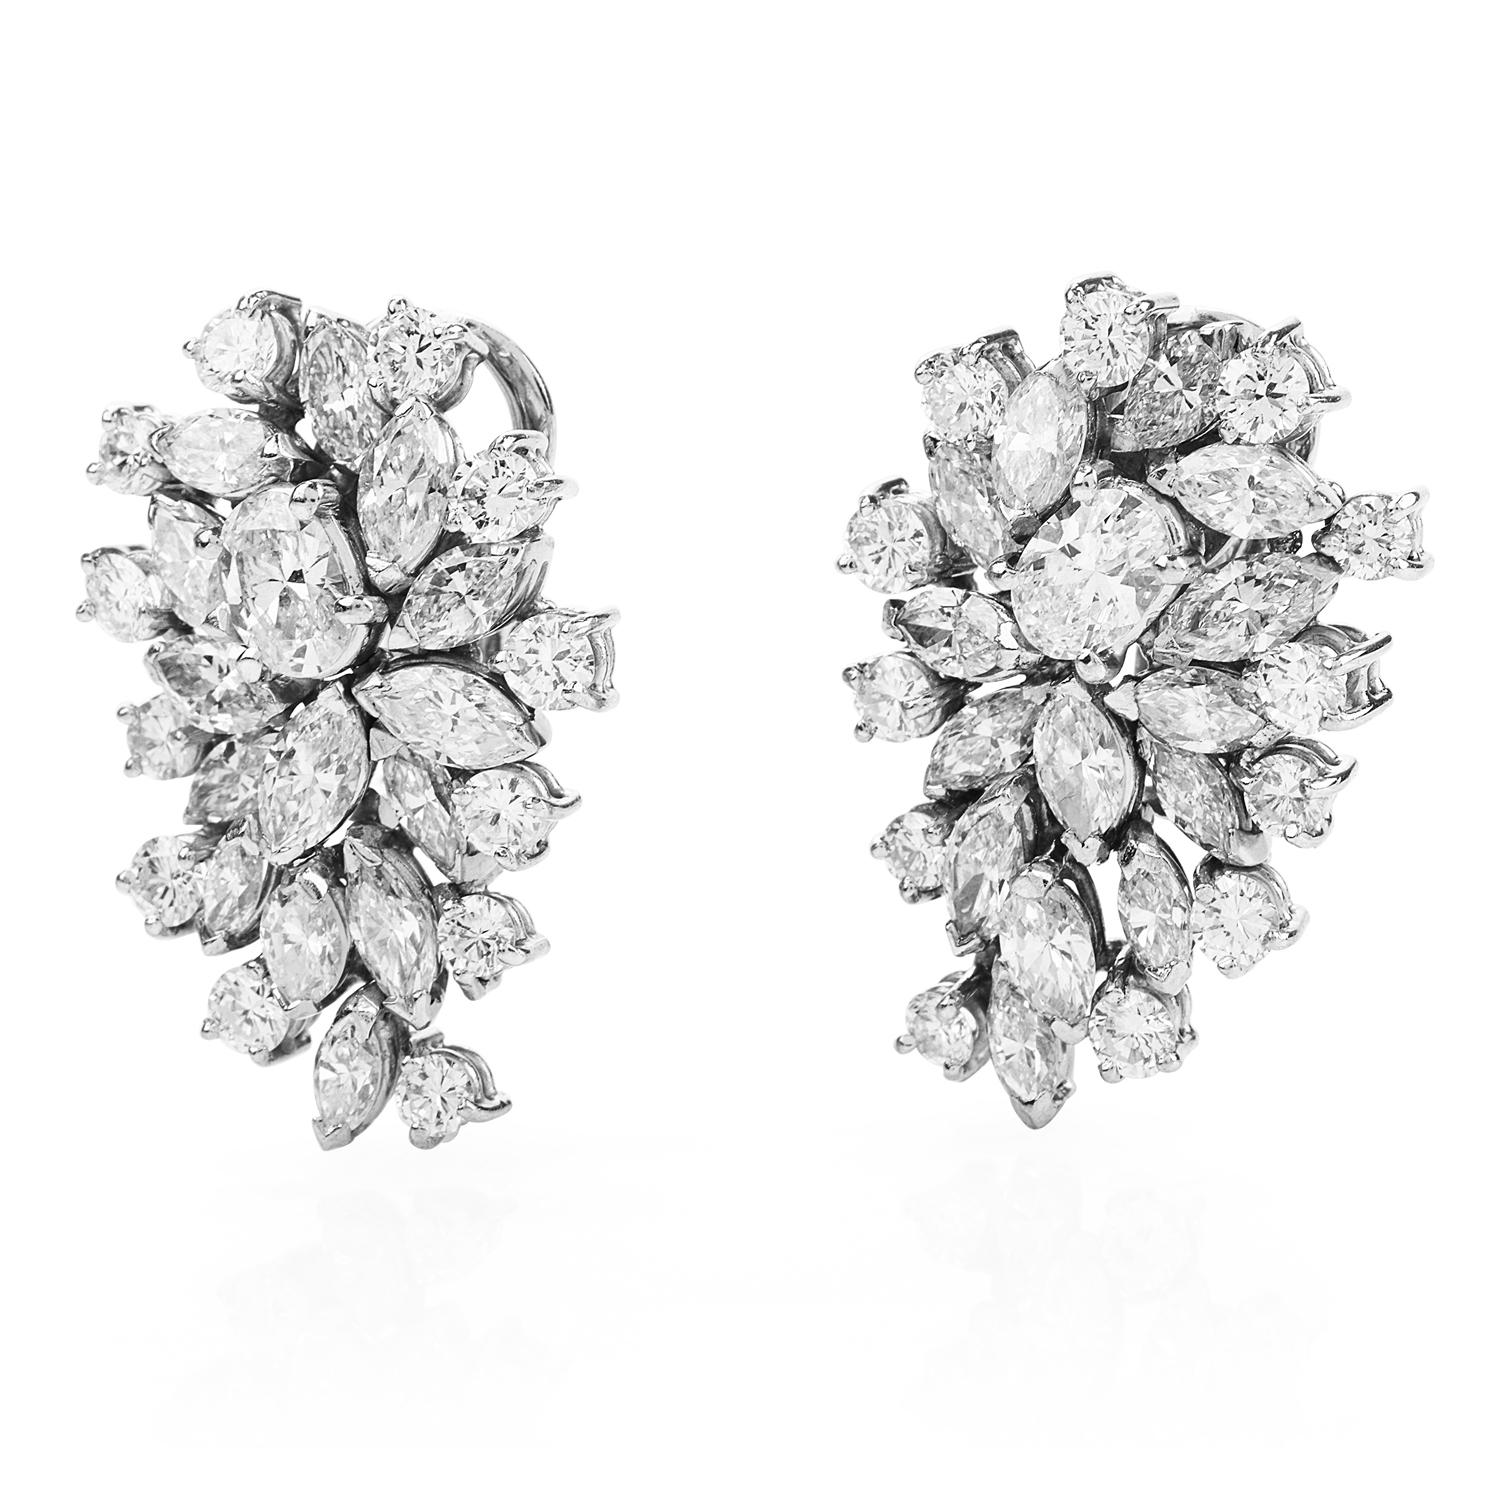 Add some gleaming beauty to your life with these elegant Diamond Platinum Marquise, Round Cut, and Oval Cluster Clip Back Earrings!  

These alluring earrings boast 60 genuine natural diamonds with marquise, oval, and round-cut, totaling